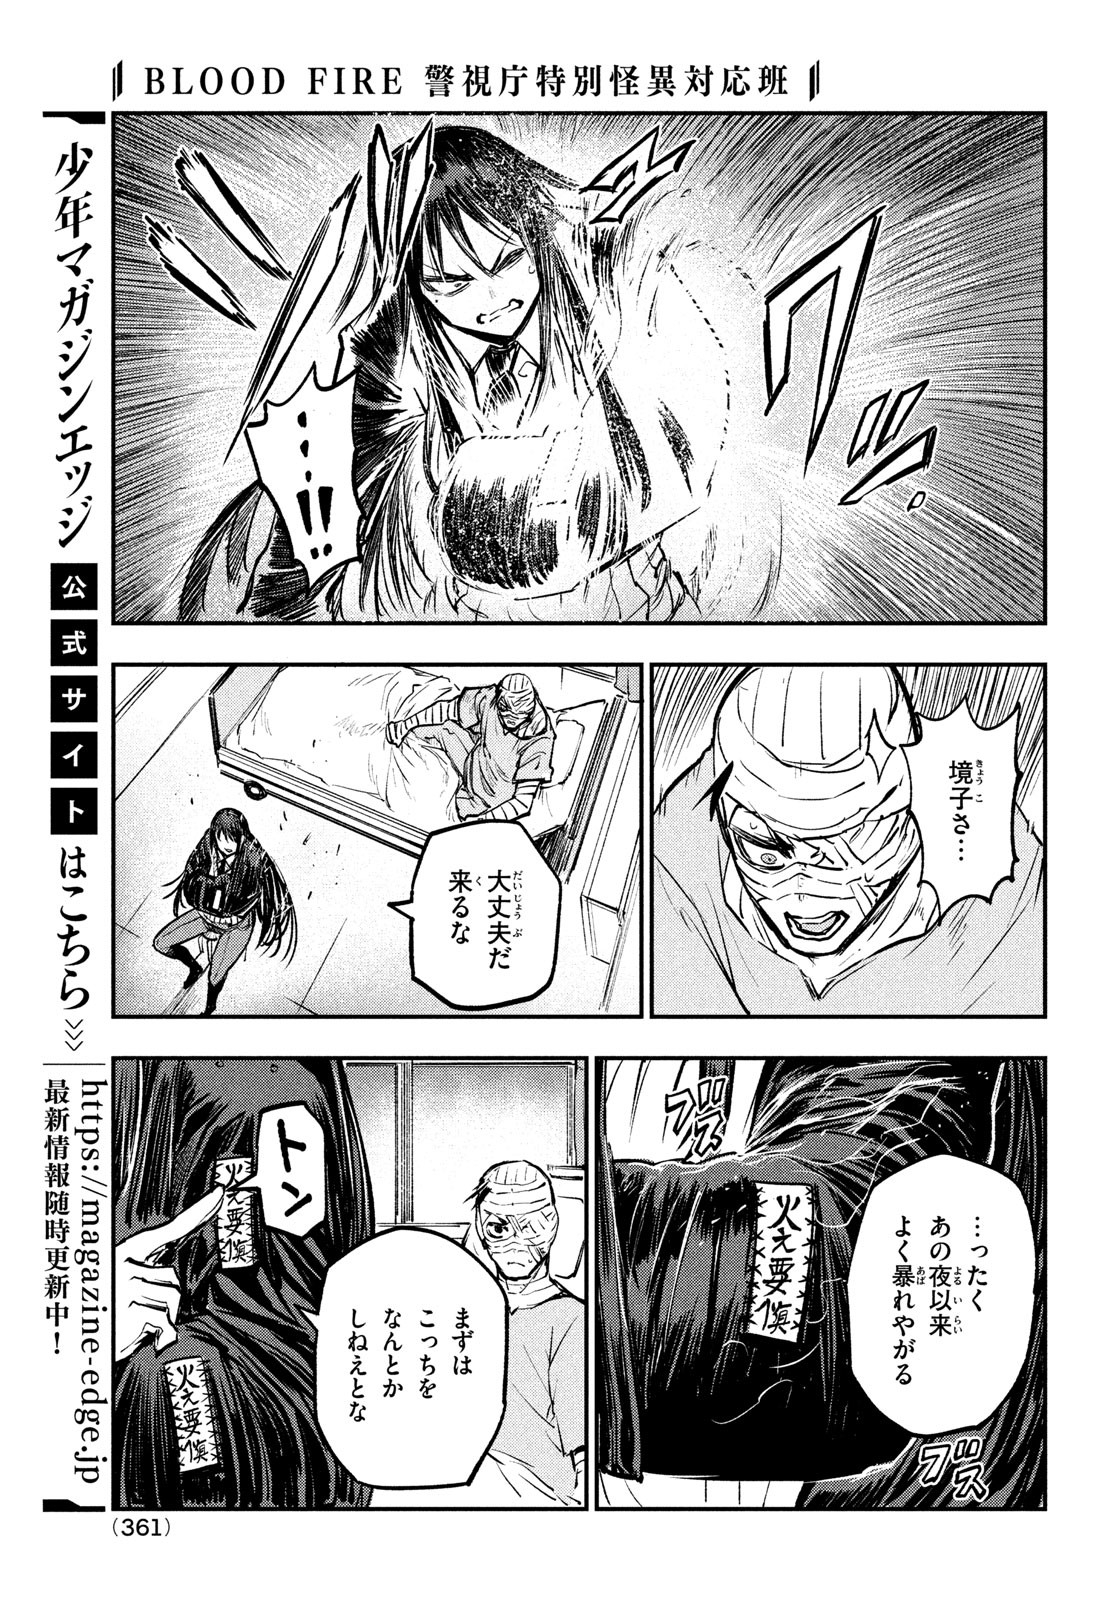 BLOODFIRE警視庁特別怪異対応班 第8話 - Page 27